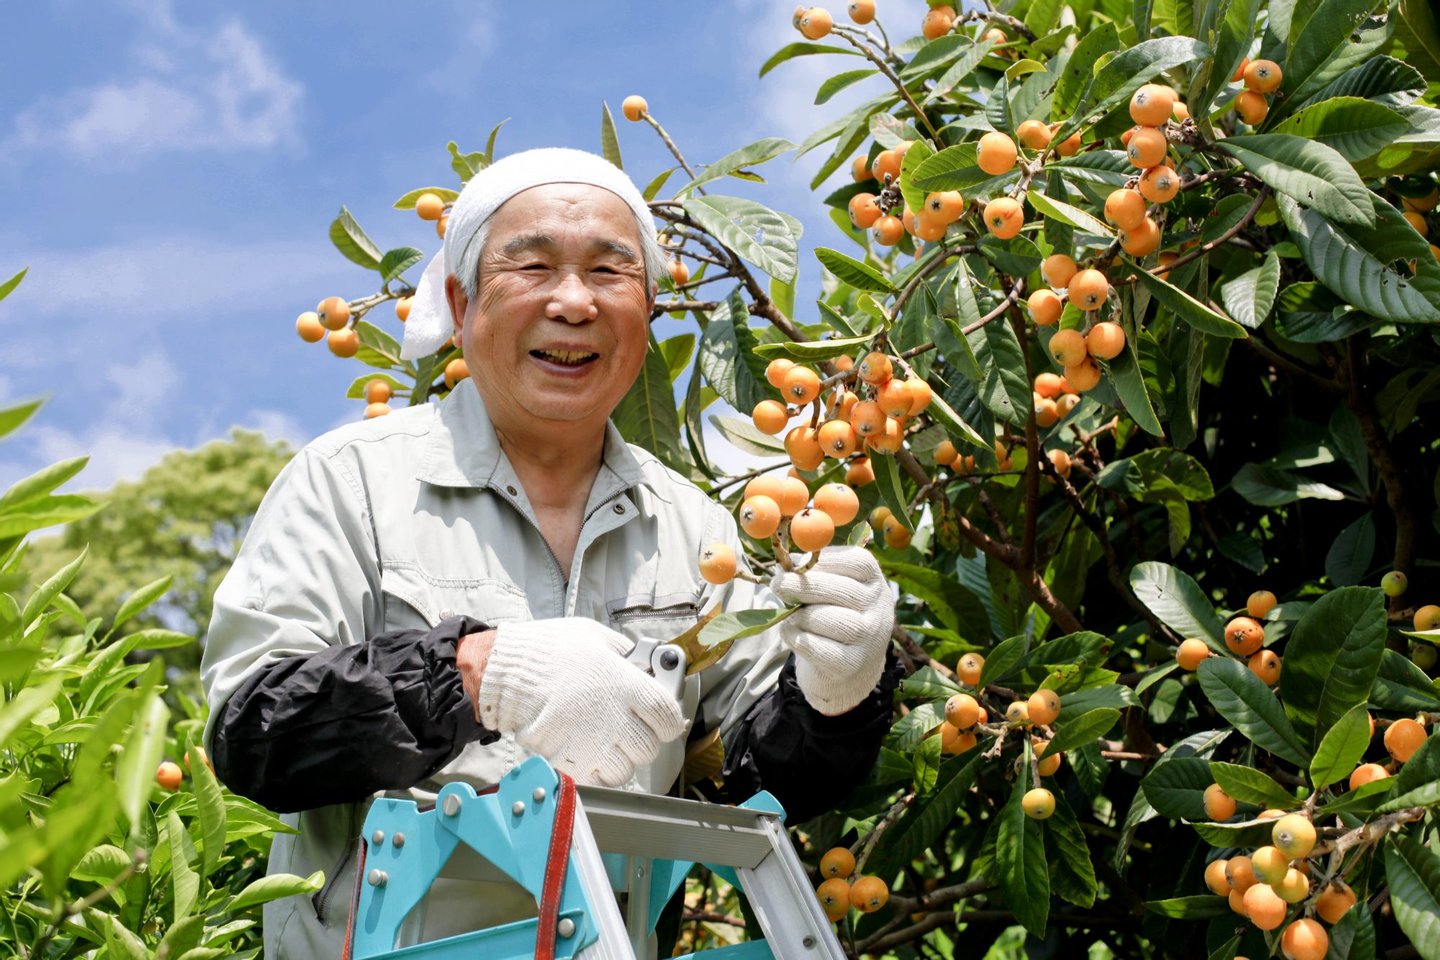 Loquat, Beauty In Nature, Vegetable Garden, Orchard, Flowerbed, Steps, Ladder, Senior Adult, Smiling, Moving Up, Working, Picking, Harvesting, Japanese Ethnicity, Asian Ethnicity, Action, Mobility, Freshness, Growth, Idyllic, Multi Colored, Bright, Green Color, Wood - Material, Full, Healthcare And Medicine, Rural Scene, Cheerful, Farmer, Occupation, Taiwan, Japan, China - East Asia, Fruit, Ripe, Crop, Summer, Staircase, Farm, Village, Sunshine Tree, It's Sunny, Jason Day - Actor, The Yellow Race, 